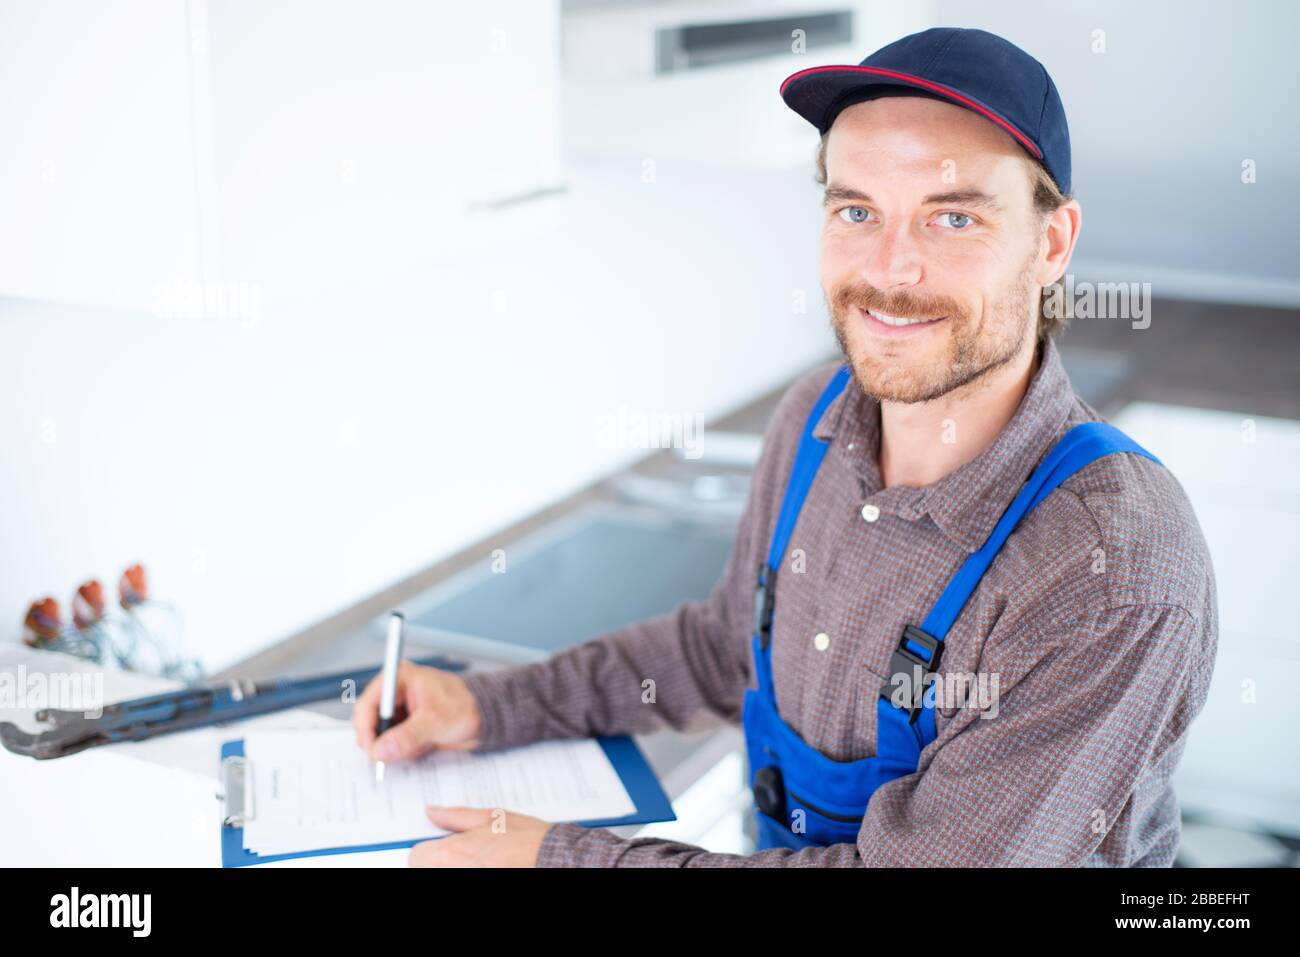 An installer notes something on a clipboard Stock Photo